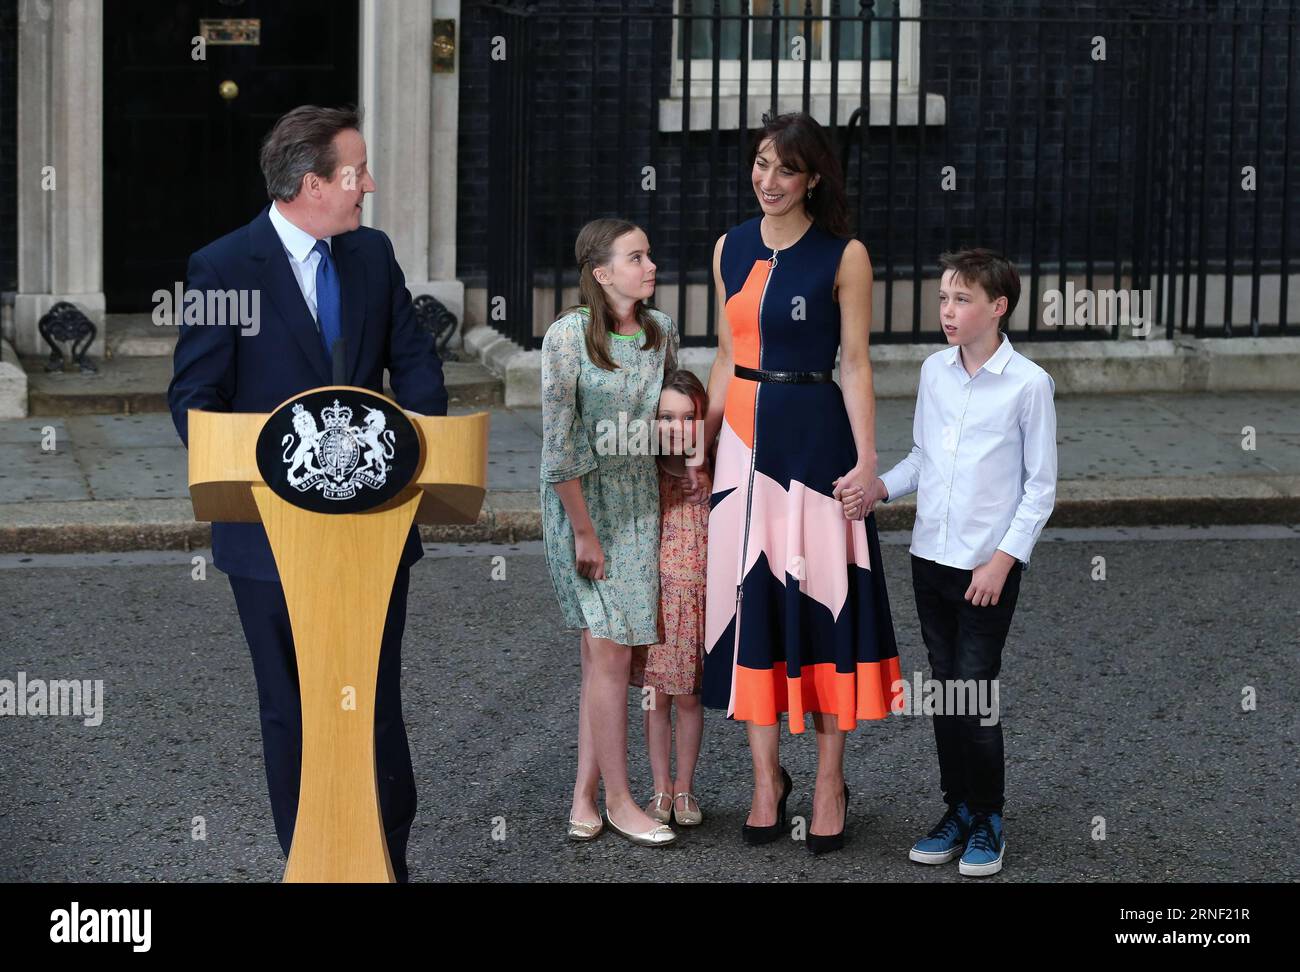 (160713) -- LONDON, JULY 13, 2016 -- British outgoing Prime Minister David Cameron(1st, L) gives a speech before leaving 10 Downing Street in London, Britain on July 13, 2016. Cameron bid farewell to 10 Downing Street and headed to Buckingham Palace to offer his resignation to Queen Elizabeth II on Wednesday afternoon. ) BRITAIN-LONDON-DAVID CAMERON-RESIGNATION HanxYan PUBLICATIONxNOTxINxCHN   160713 London July 13 2016 British Outgoing Prime Ministers David Cameron 1st l Gives a Speech Before leaving 10 Downing Street in London Britain ON July 13 2016 Cameron BID Farewell to 10 Downing Street Stock Photo